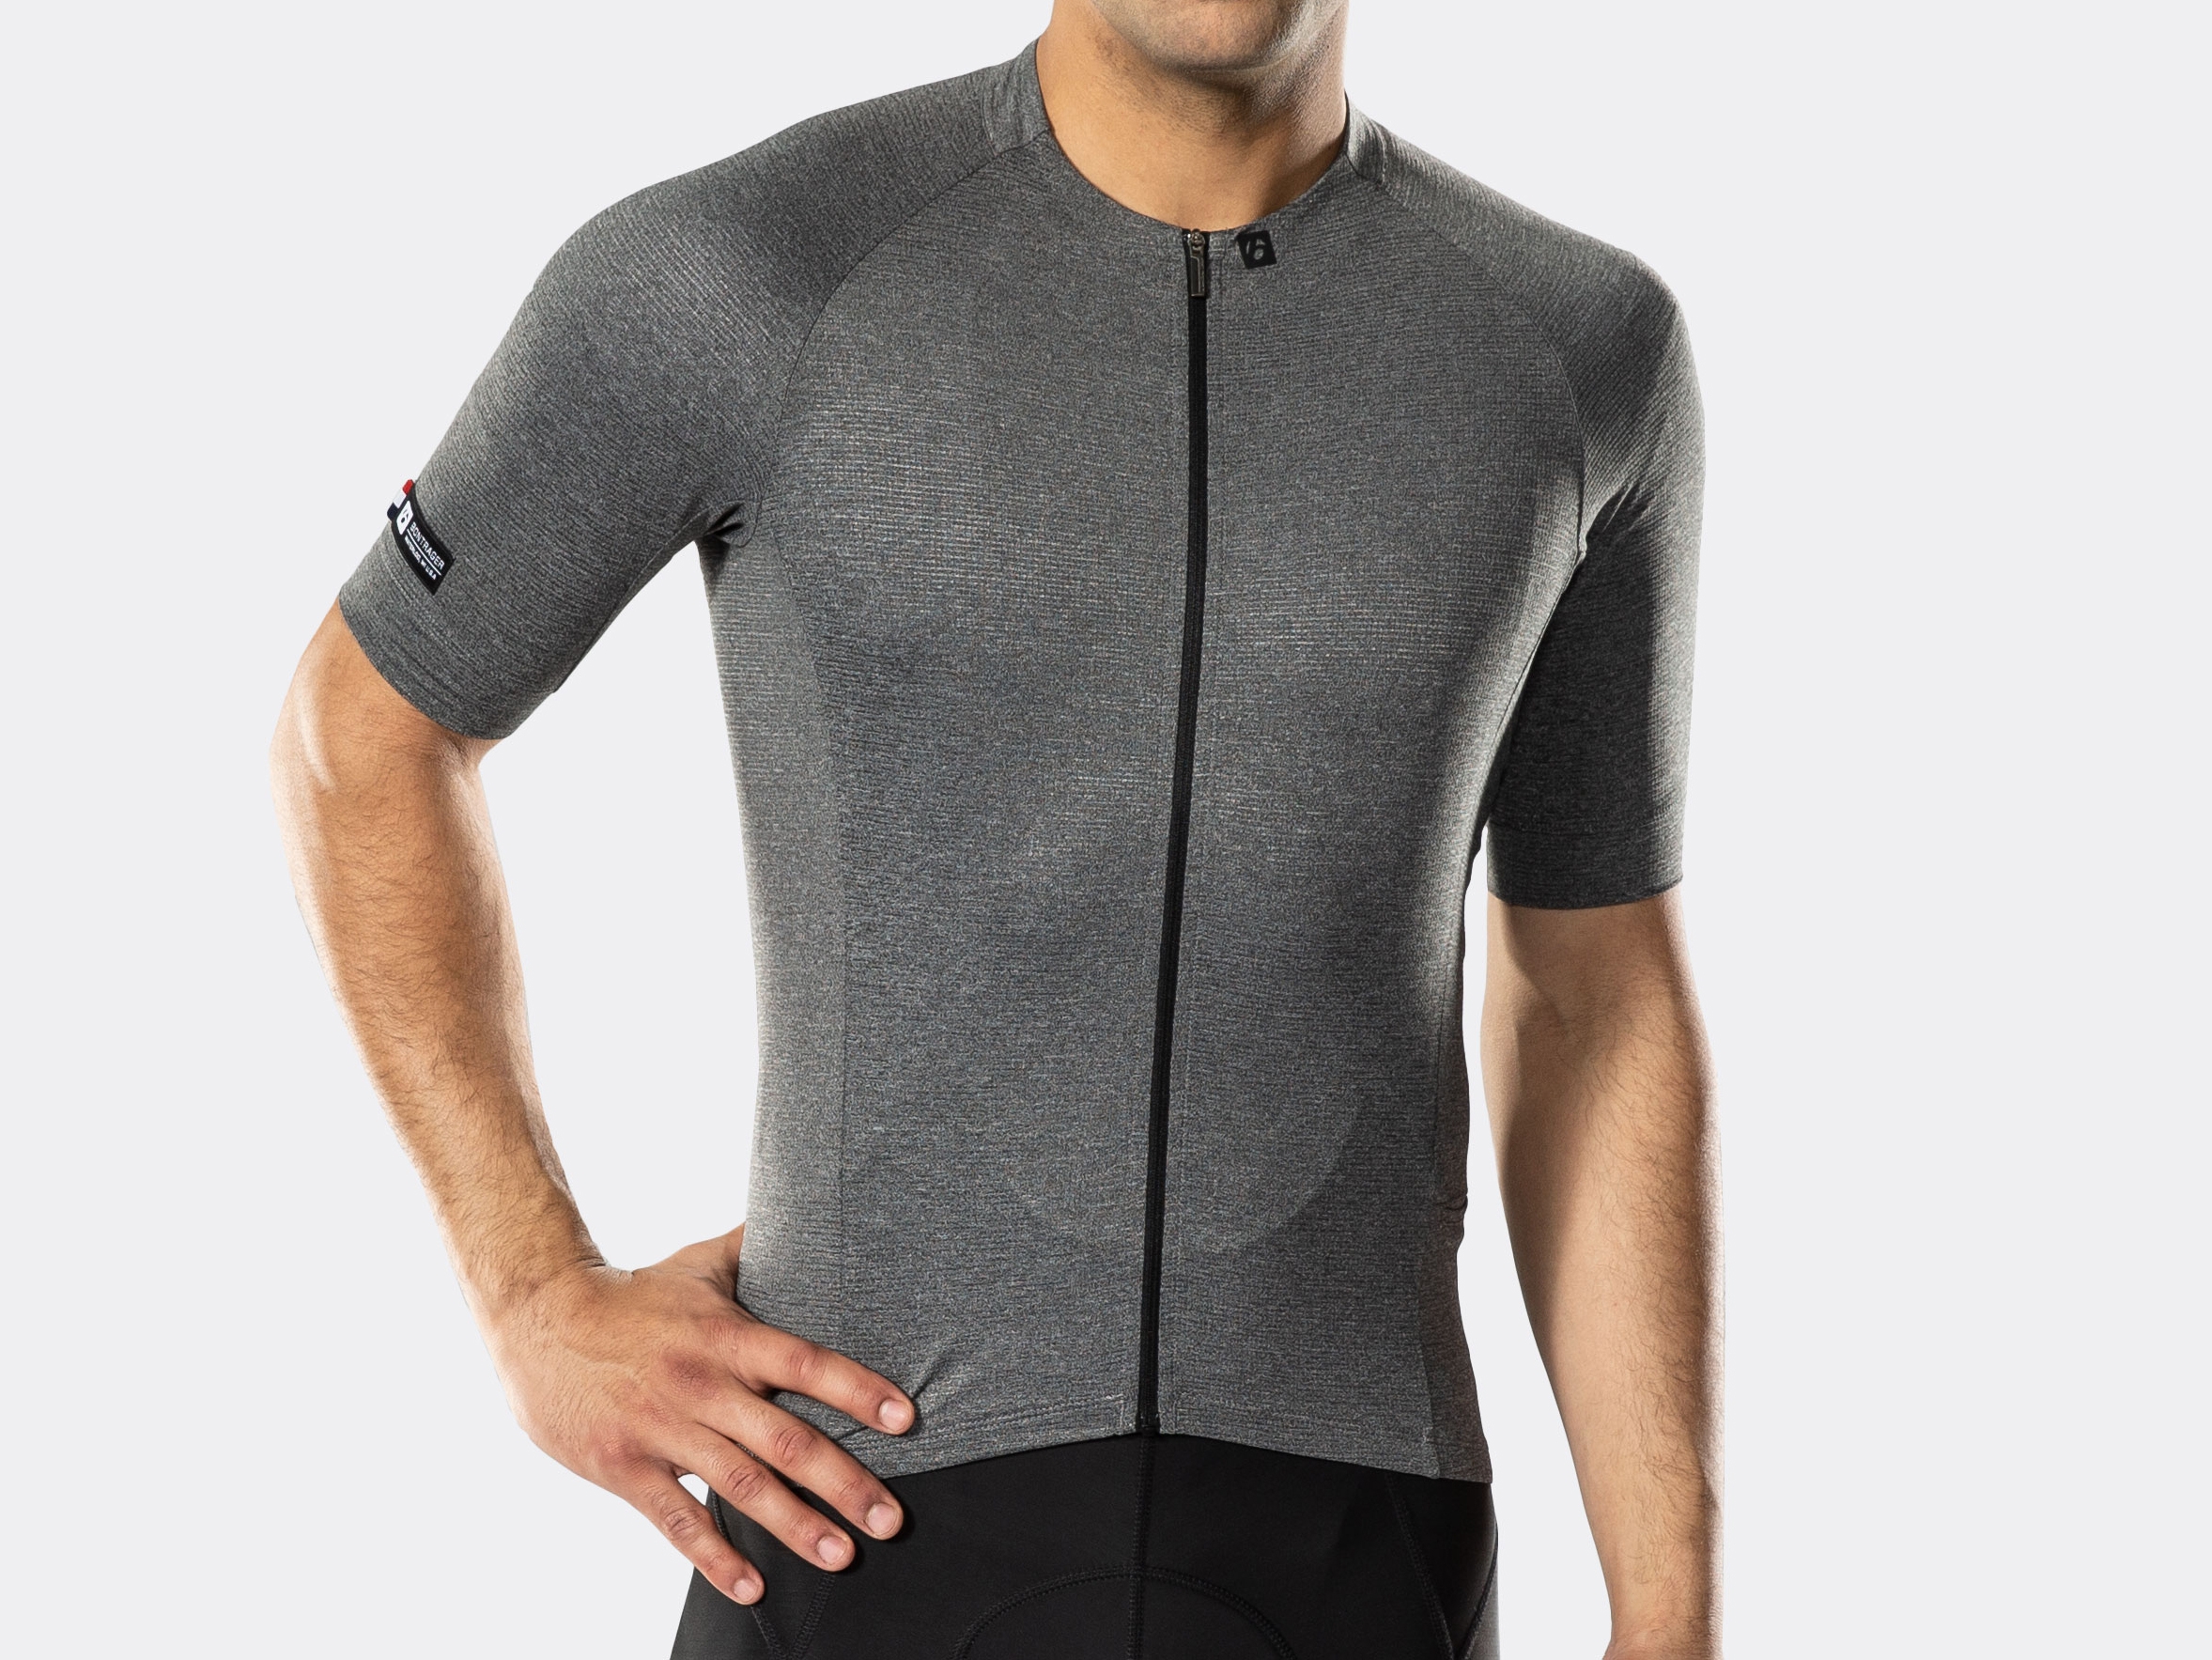 bontrager cycling jersey